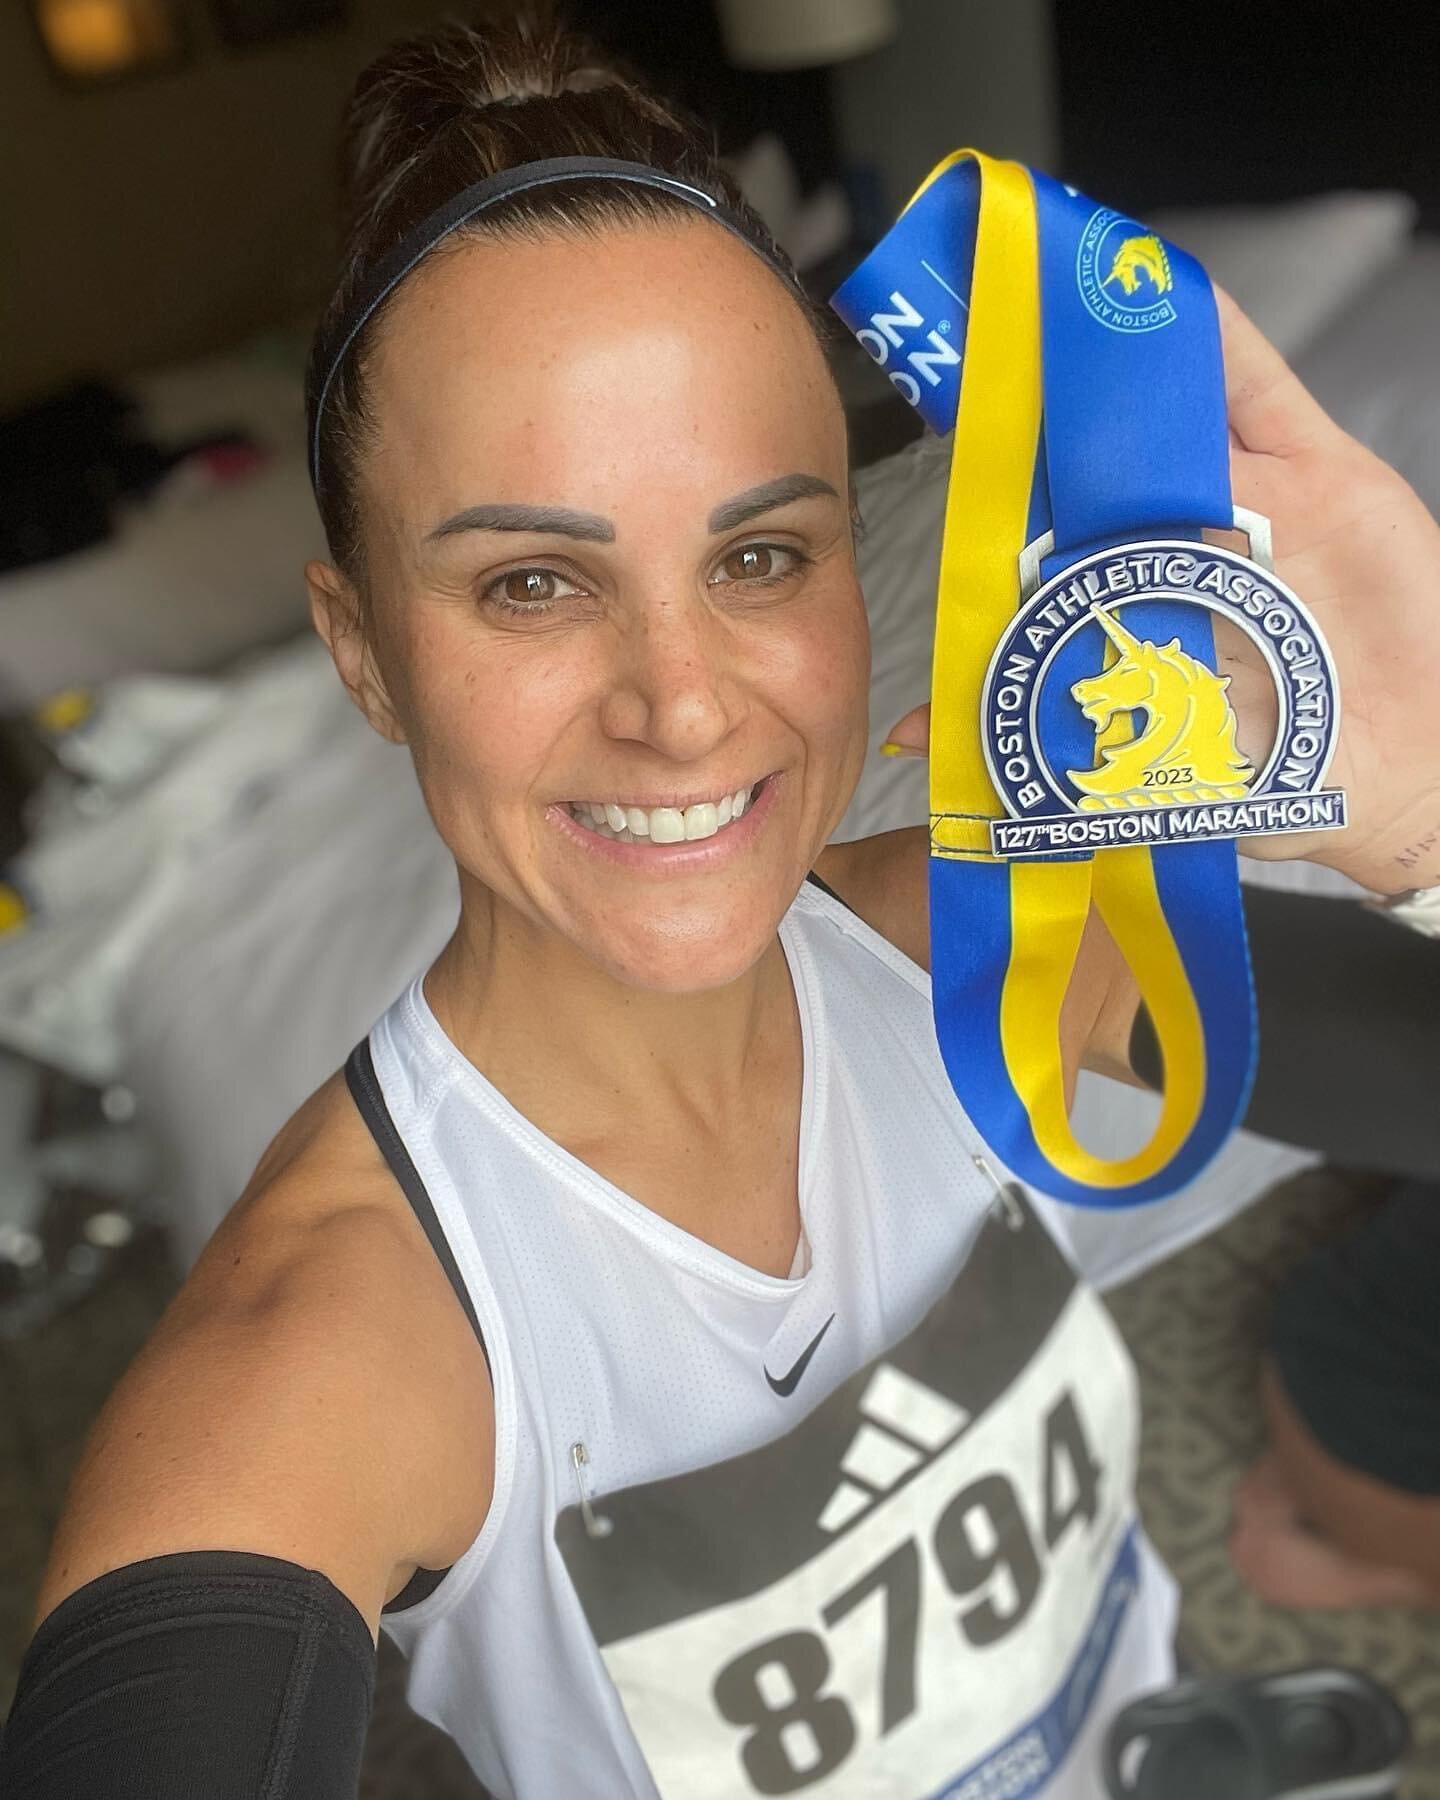 She&rsquo;s a Boston Marathoner! 

Our run coach @lydzpalmieri smashed out this tough marathon overnight. She&rsquo;s now completed 3 of the world major marathons and has her sights on Tokyo next year. 

Enjoy the post event glow - we&rsquo;re proud 